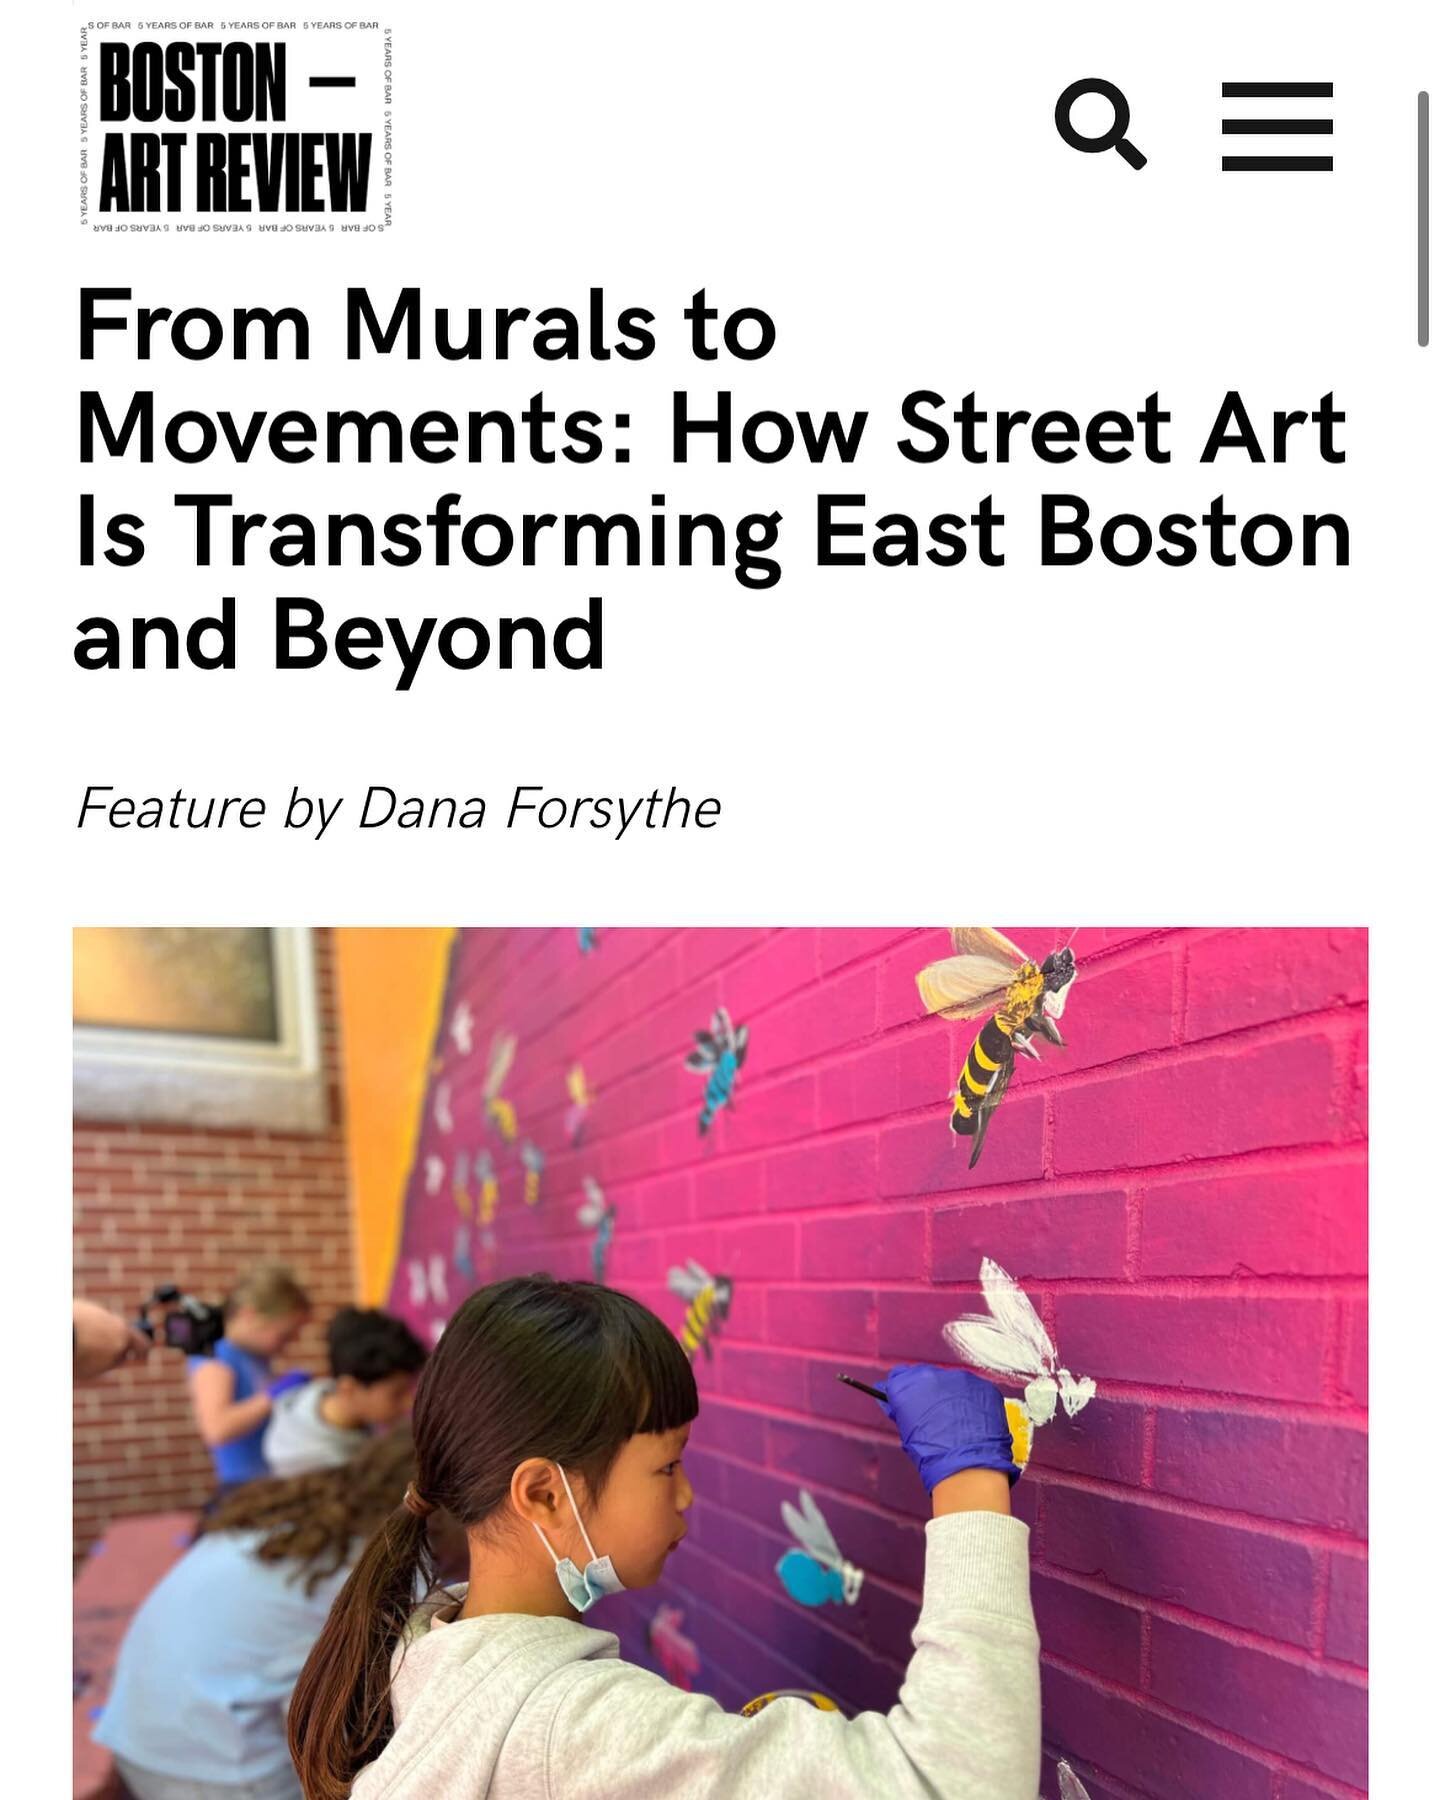 Thanks for the love @bostonartreview 

Great article by @danafour shines a spotlight on our work bringing ARTivism to public schools in the form of large scale murals and installations. Check out the link in our bio to learn more about initiatives th